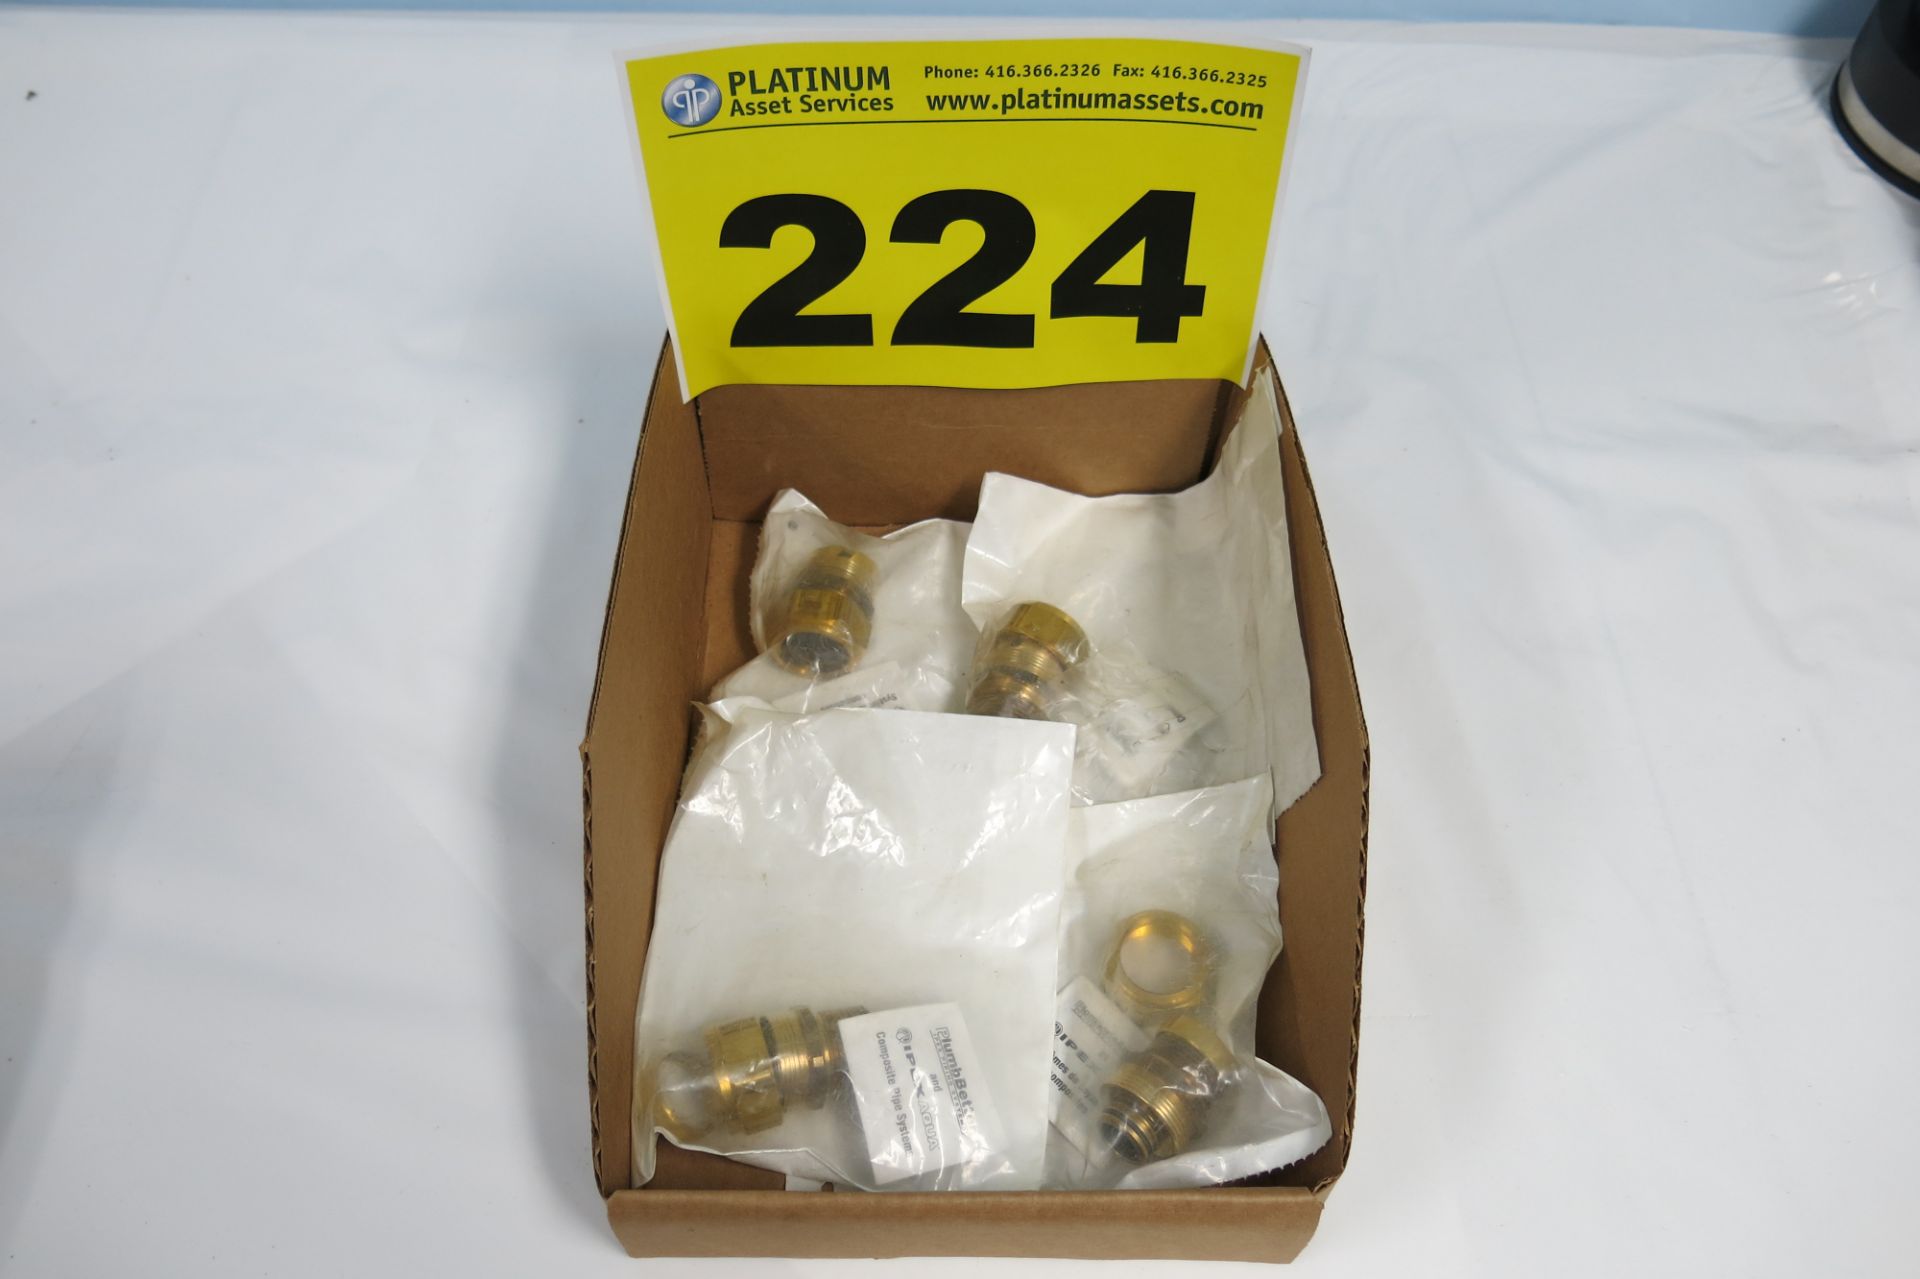 LOT OF COMPRESSION PIPE FITTINGS - NEW (LOCATED IN MISSISSAUGA)